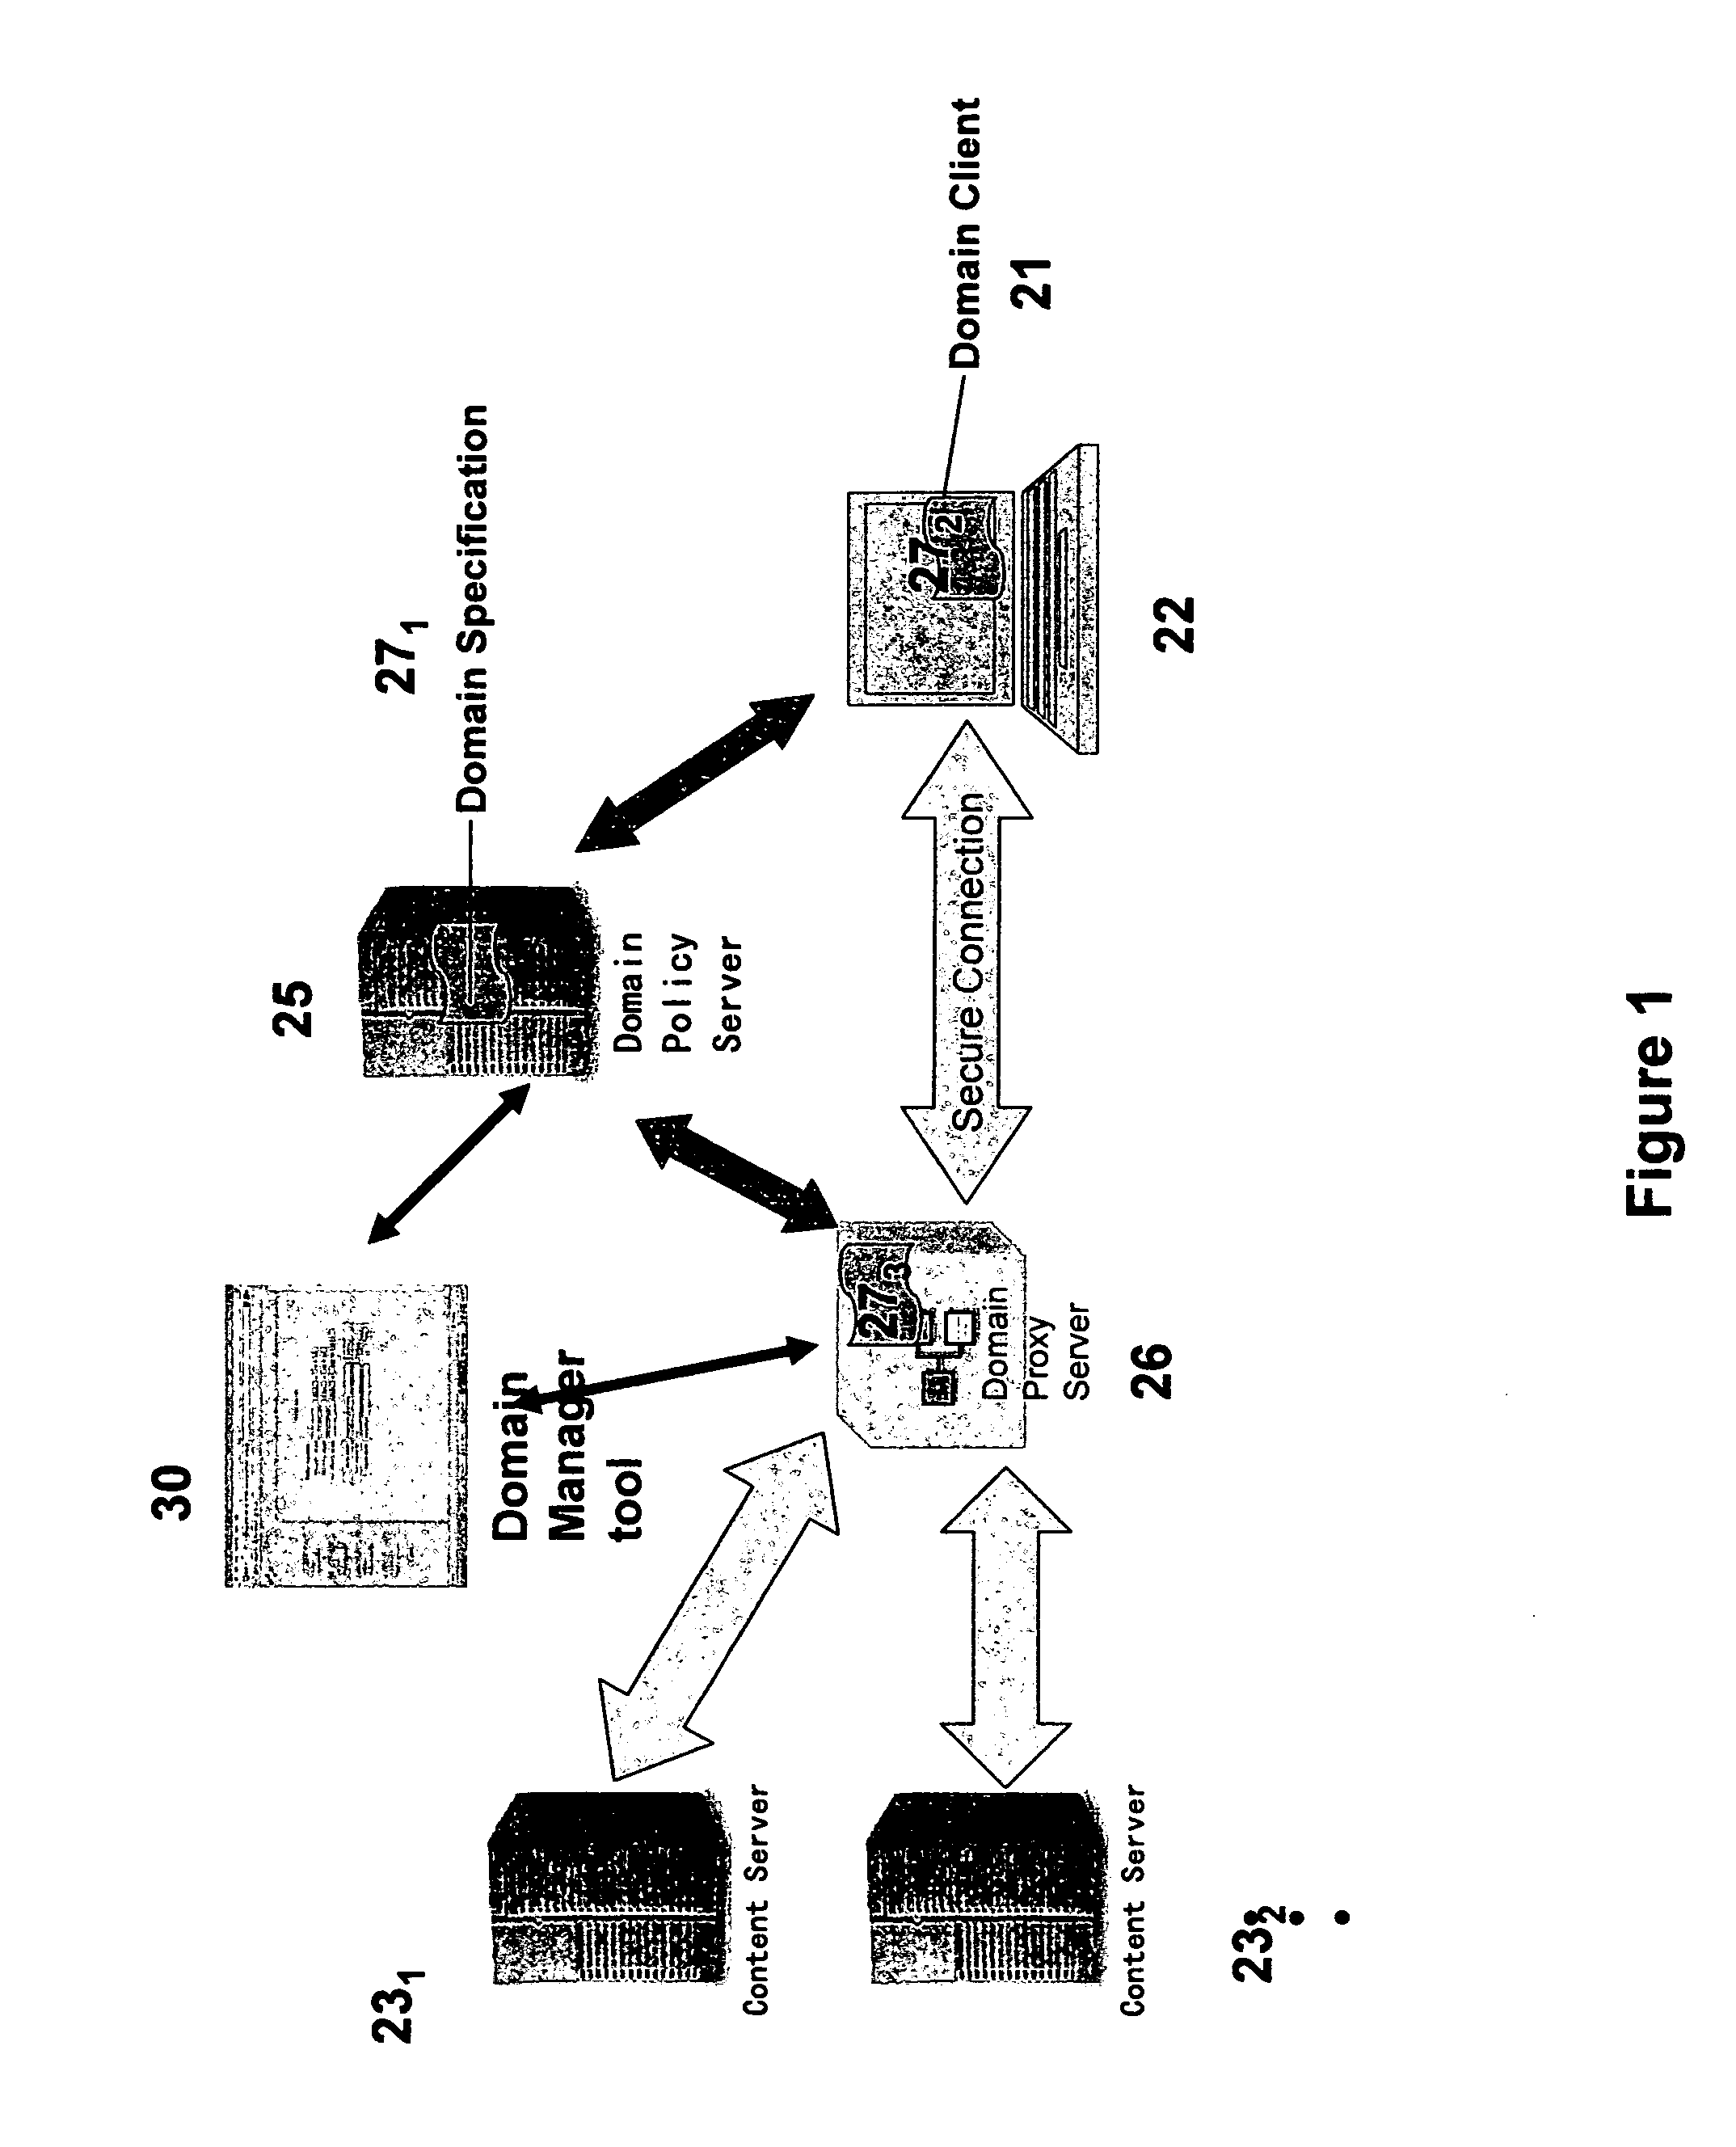 Method and system to provide secure data connection between creation points and use points